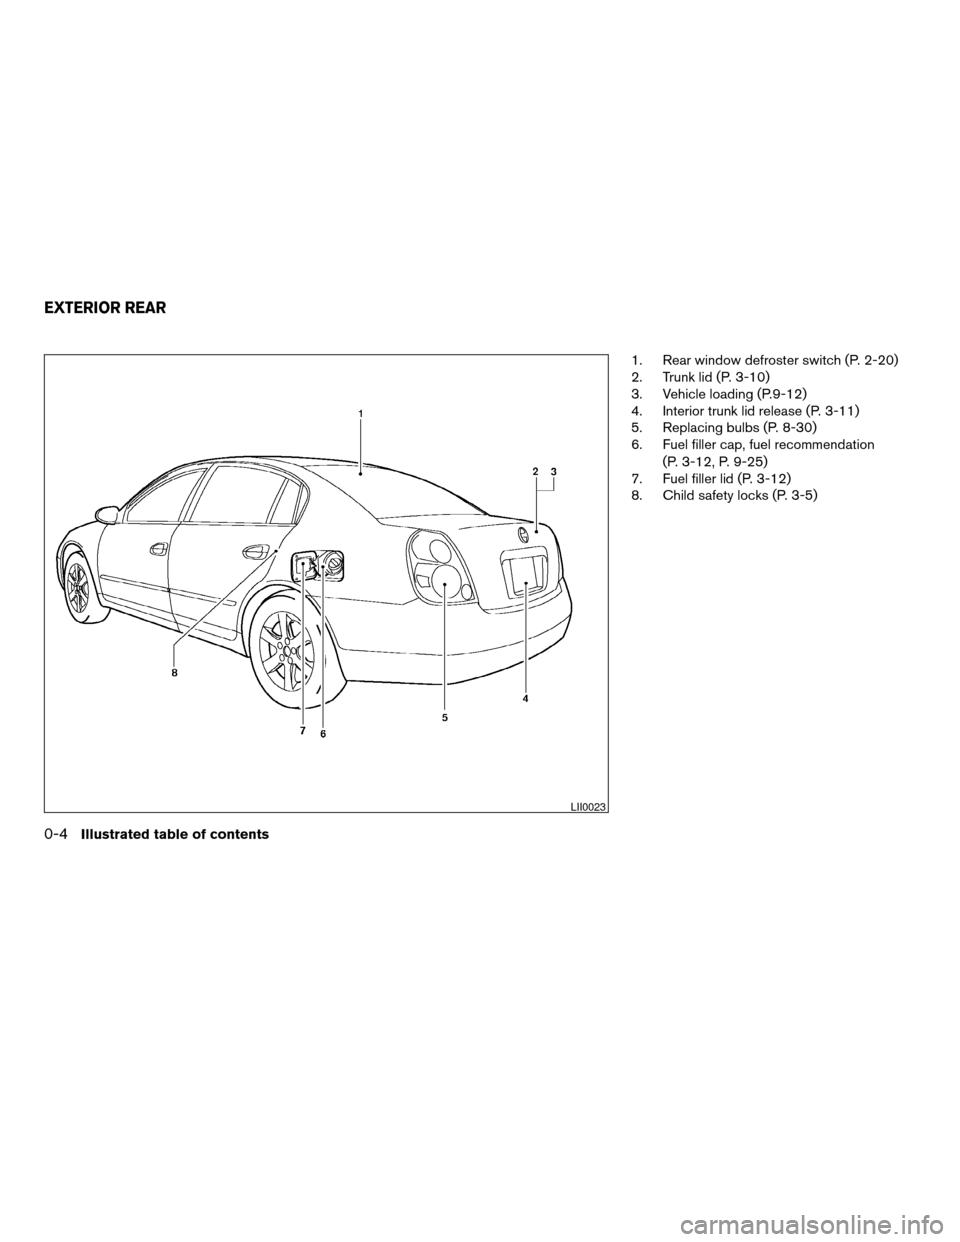 NISSAN ALTIMA 2005 L31 / 3.G Owners Manual 1. Rear window defroster switch (P. 2-20)
2. Trunk lid (P. 3-10)
3. Vehicle loading (P.9-12)
4. Interior trunk lid release (P. 3-11)
5. Replacing bulbs (P. 8-30)
6. Fuel filler cap, fuel recommendatio